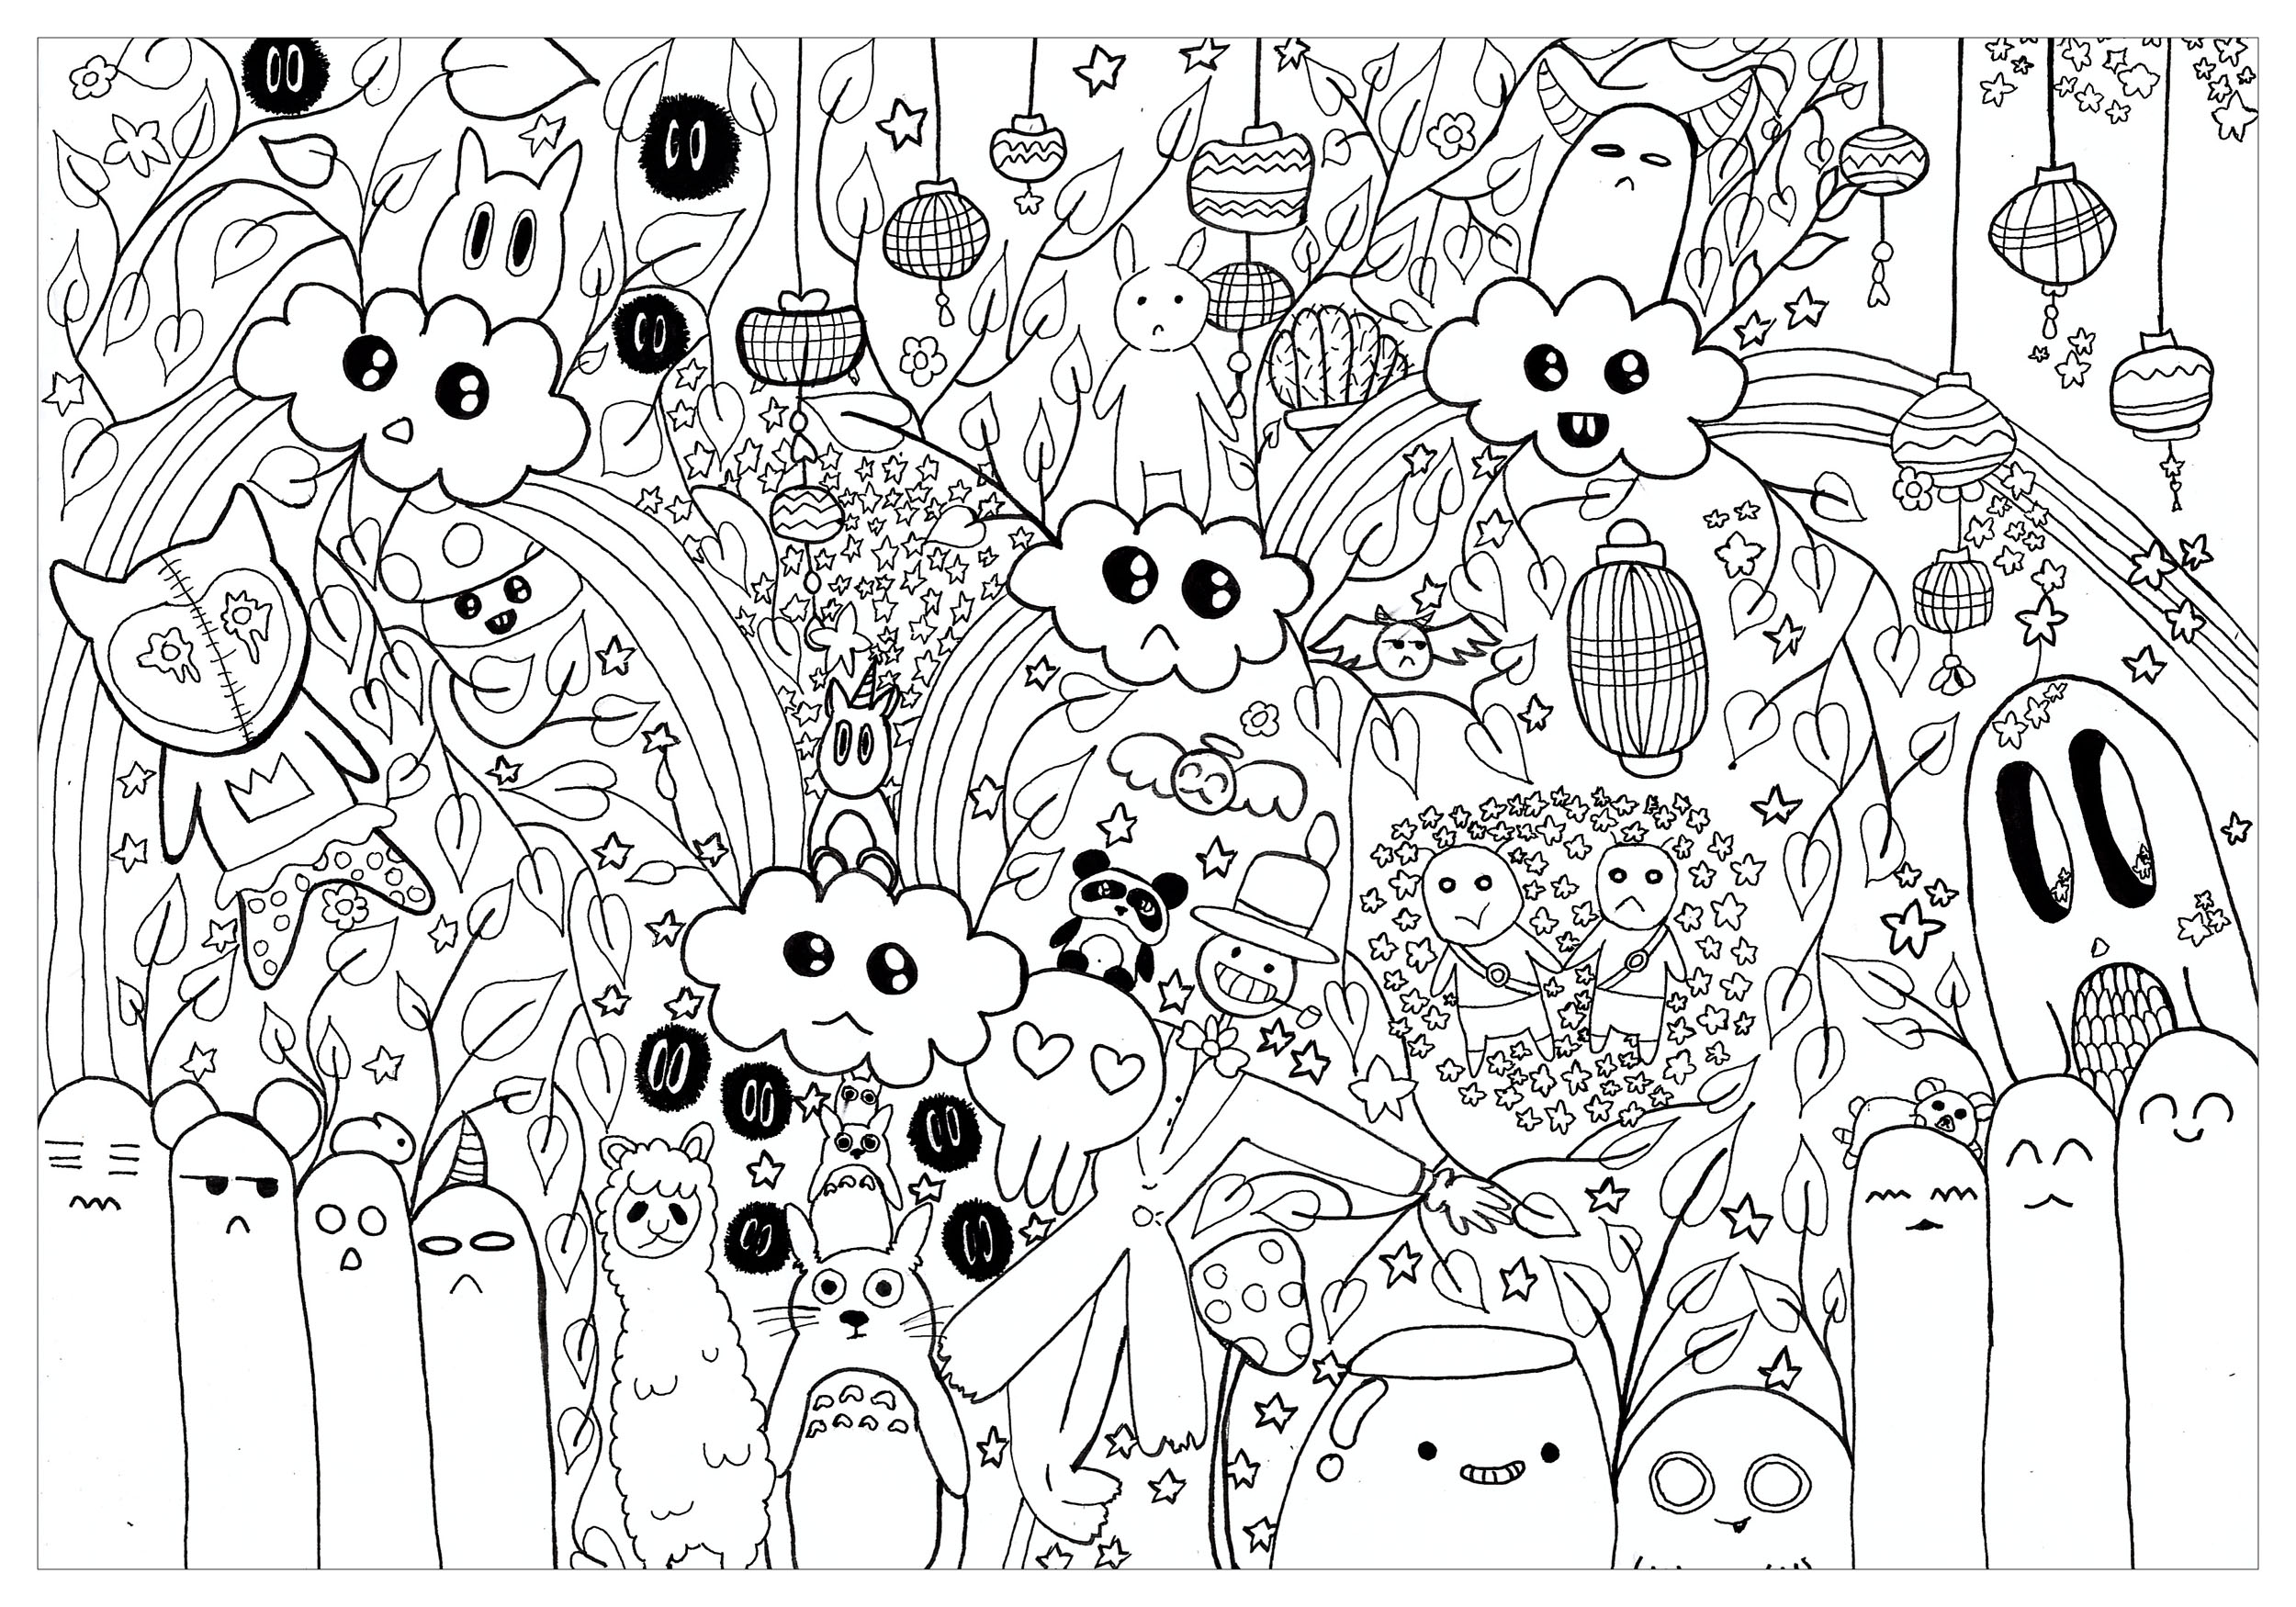 Simple Doodle Art coloring page to print and color for free